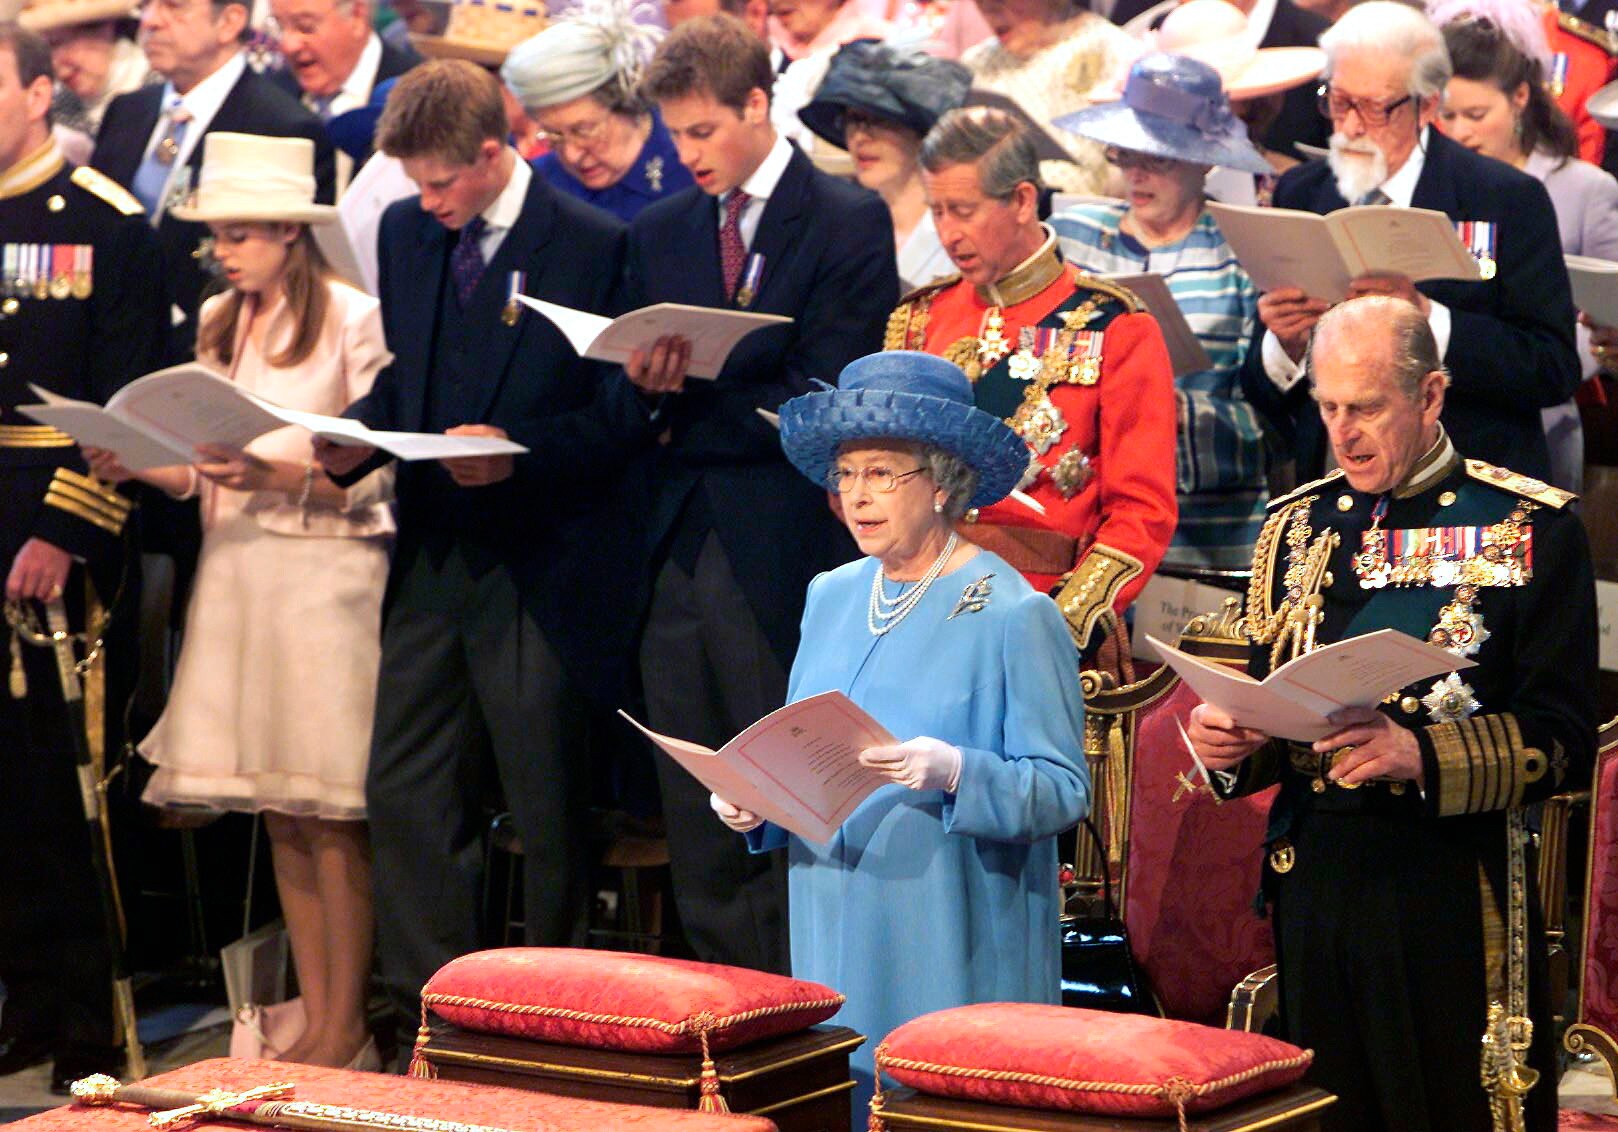 The Queen's sincere faith, and monarchy's future in secular Europe